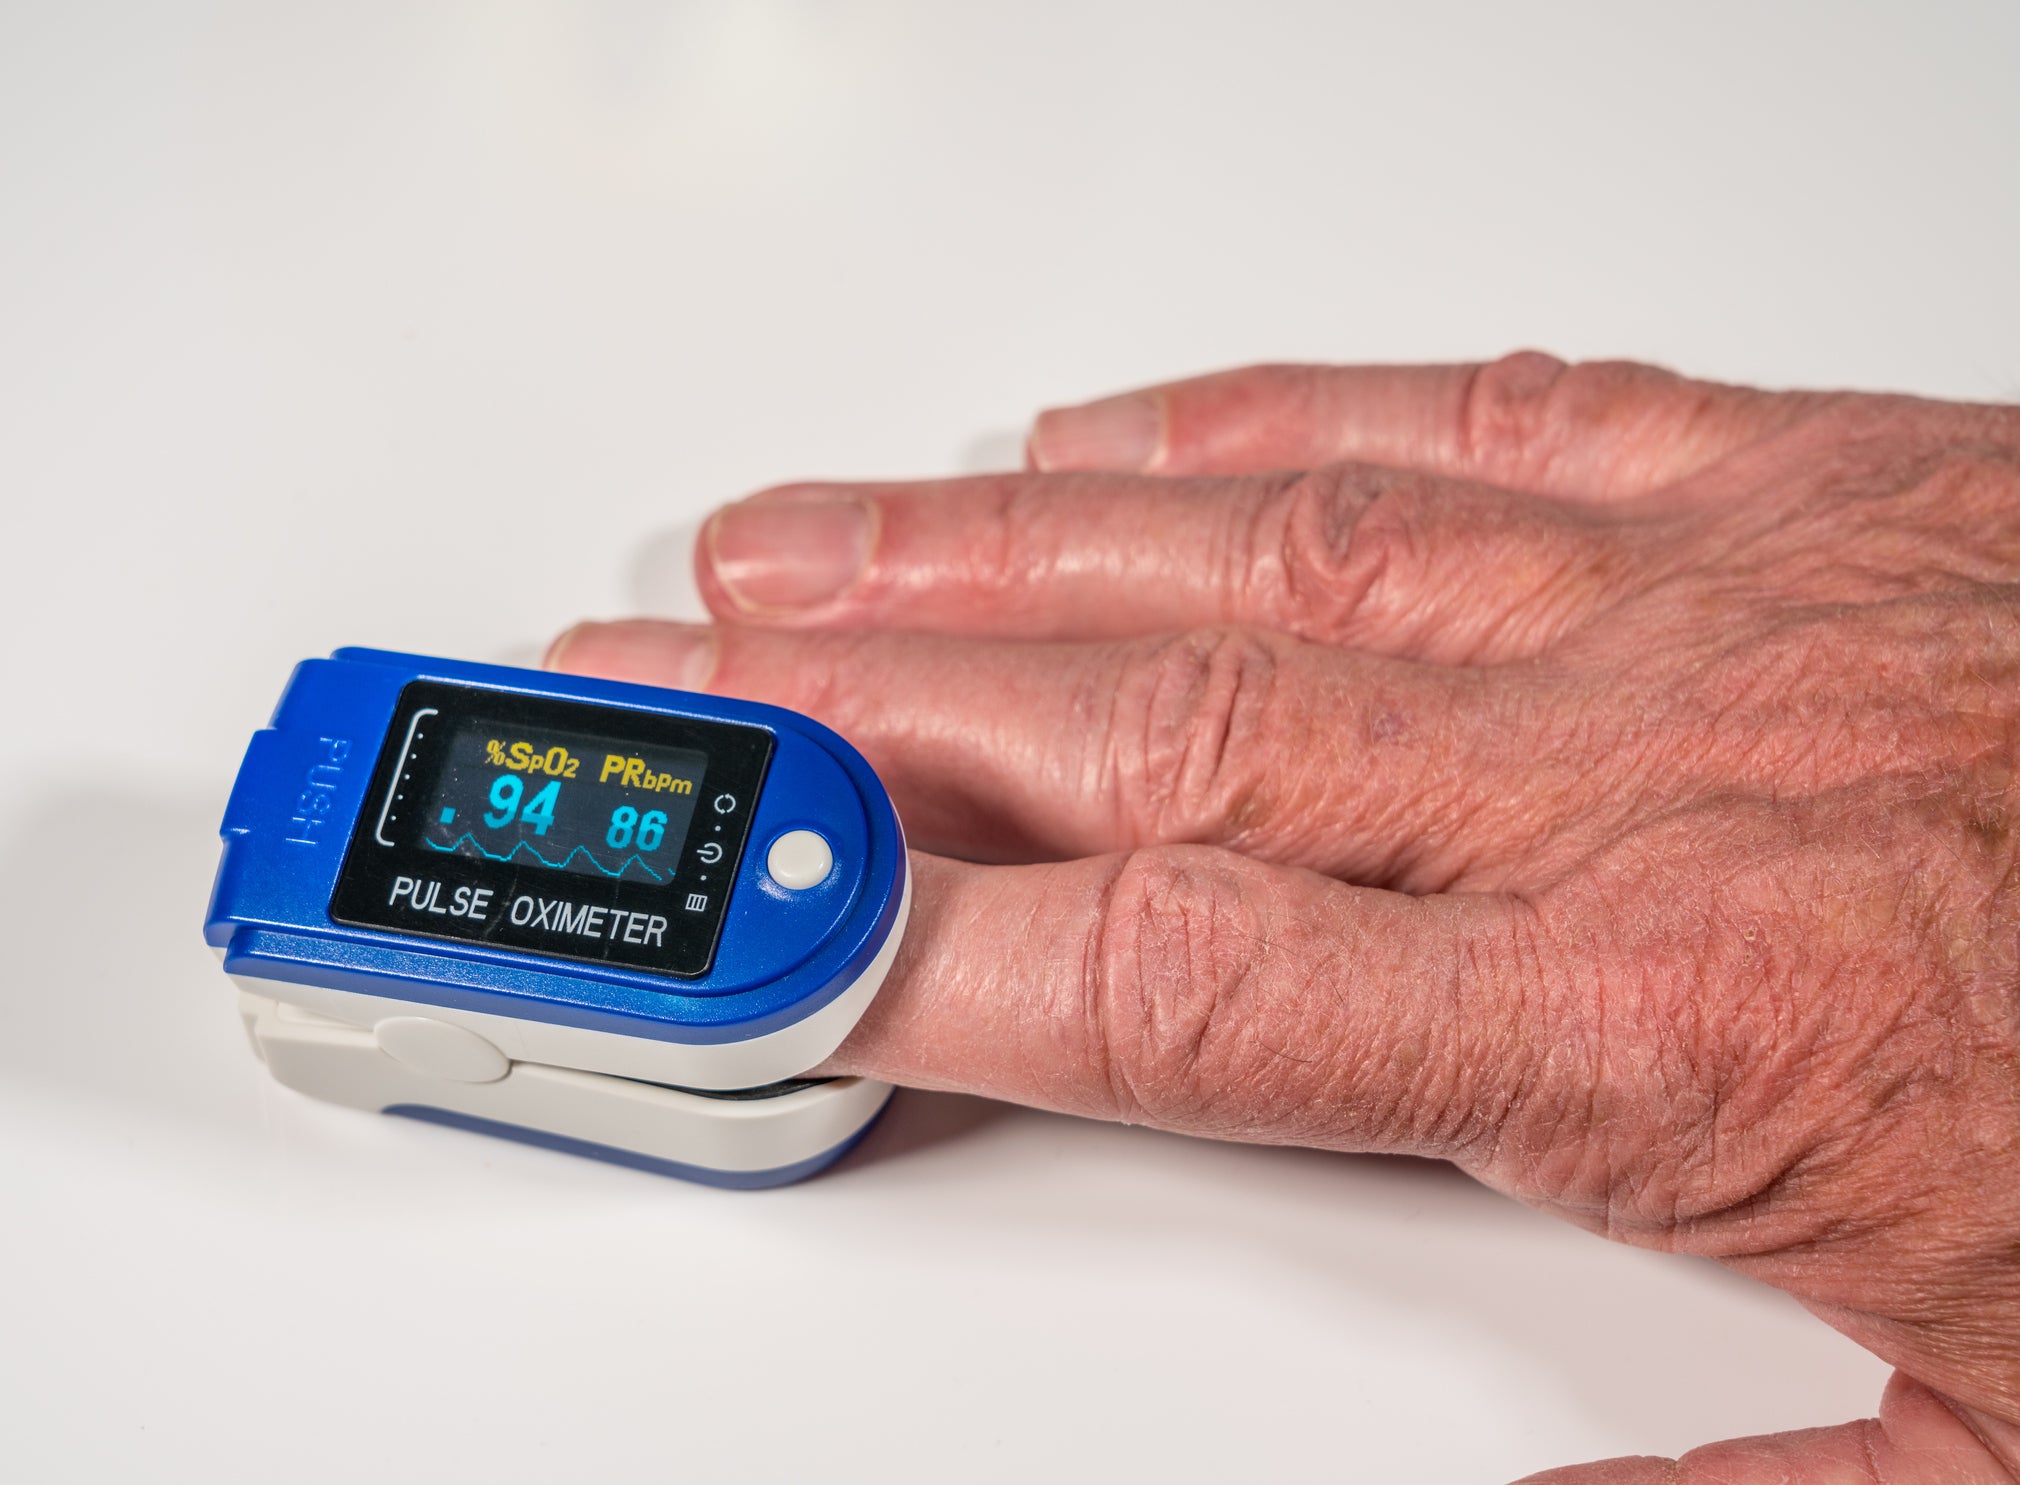 An oximeter can detect a sharp drop in blood oxygen levels